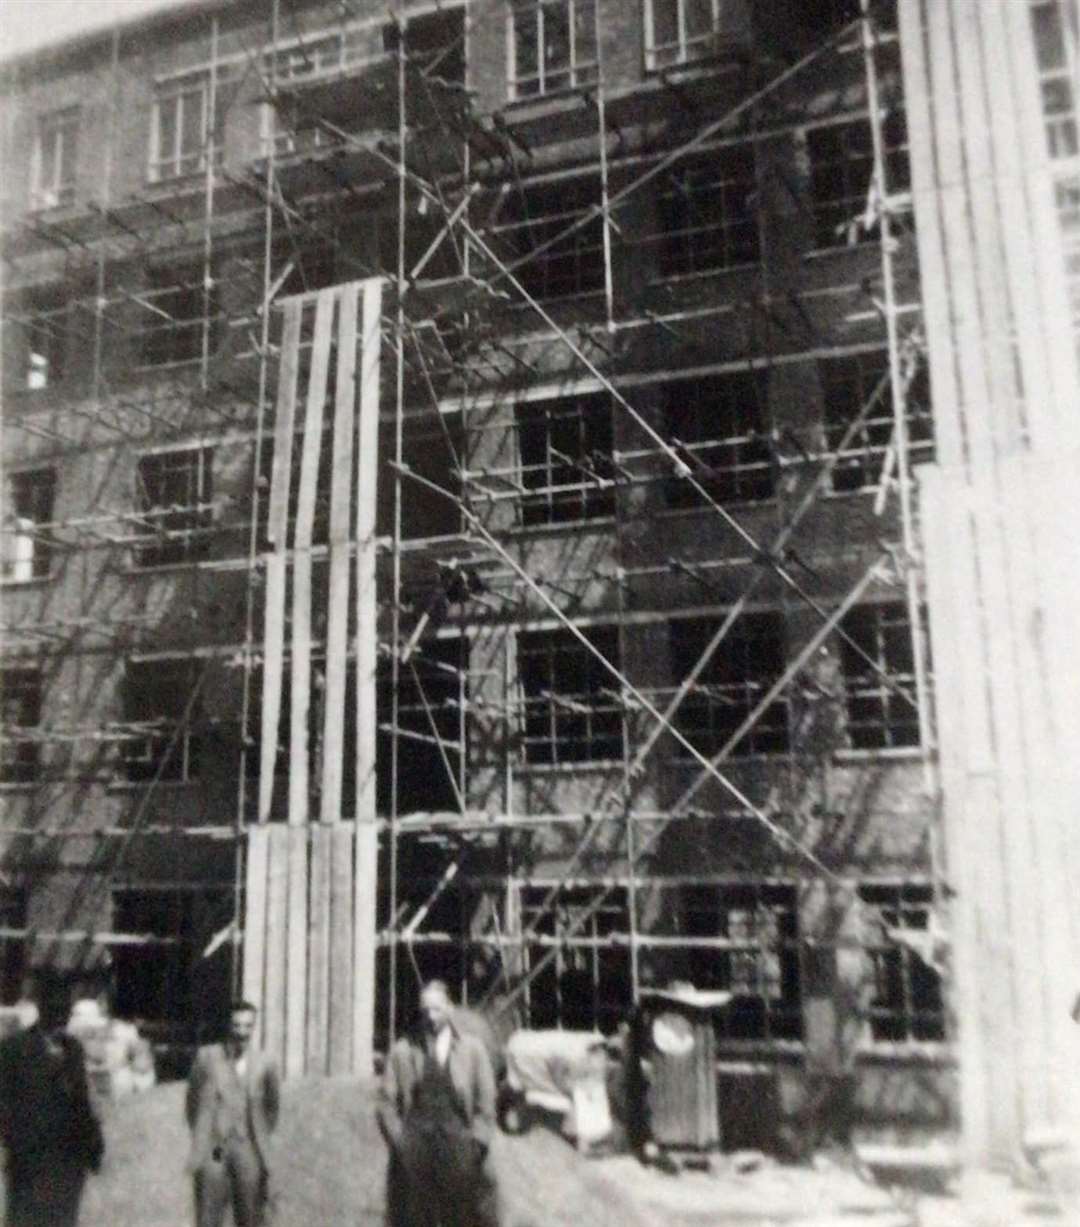 Becket House in Canterbury under construction in the 1930s